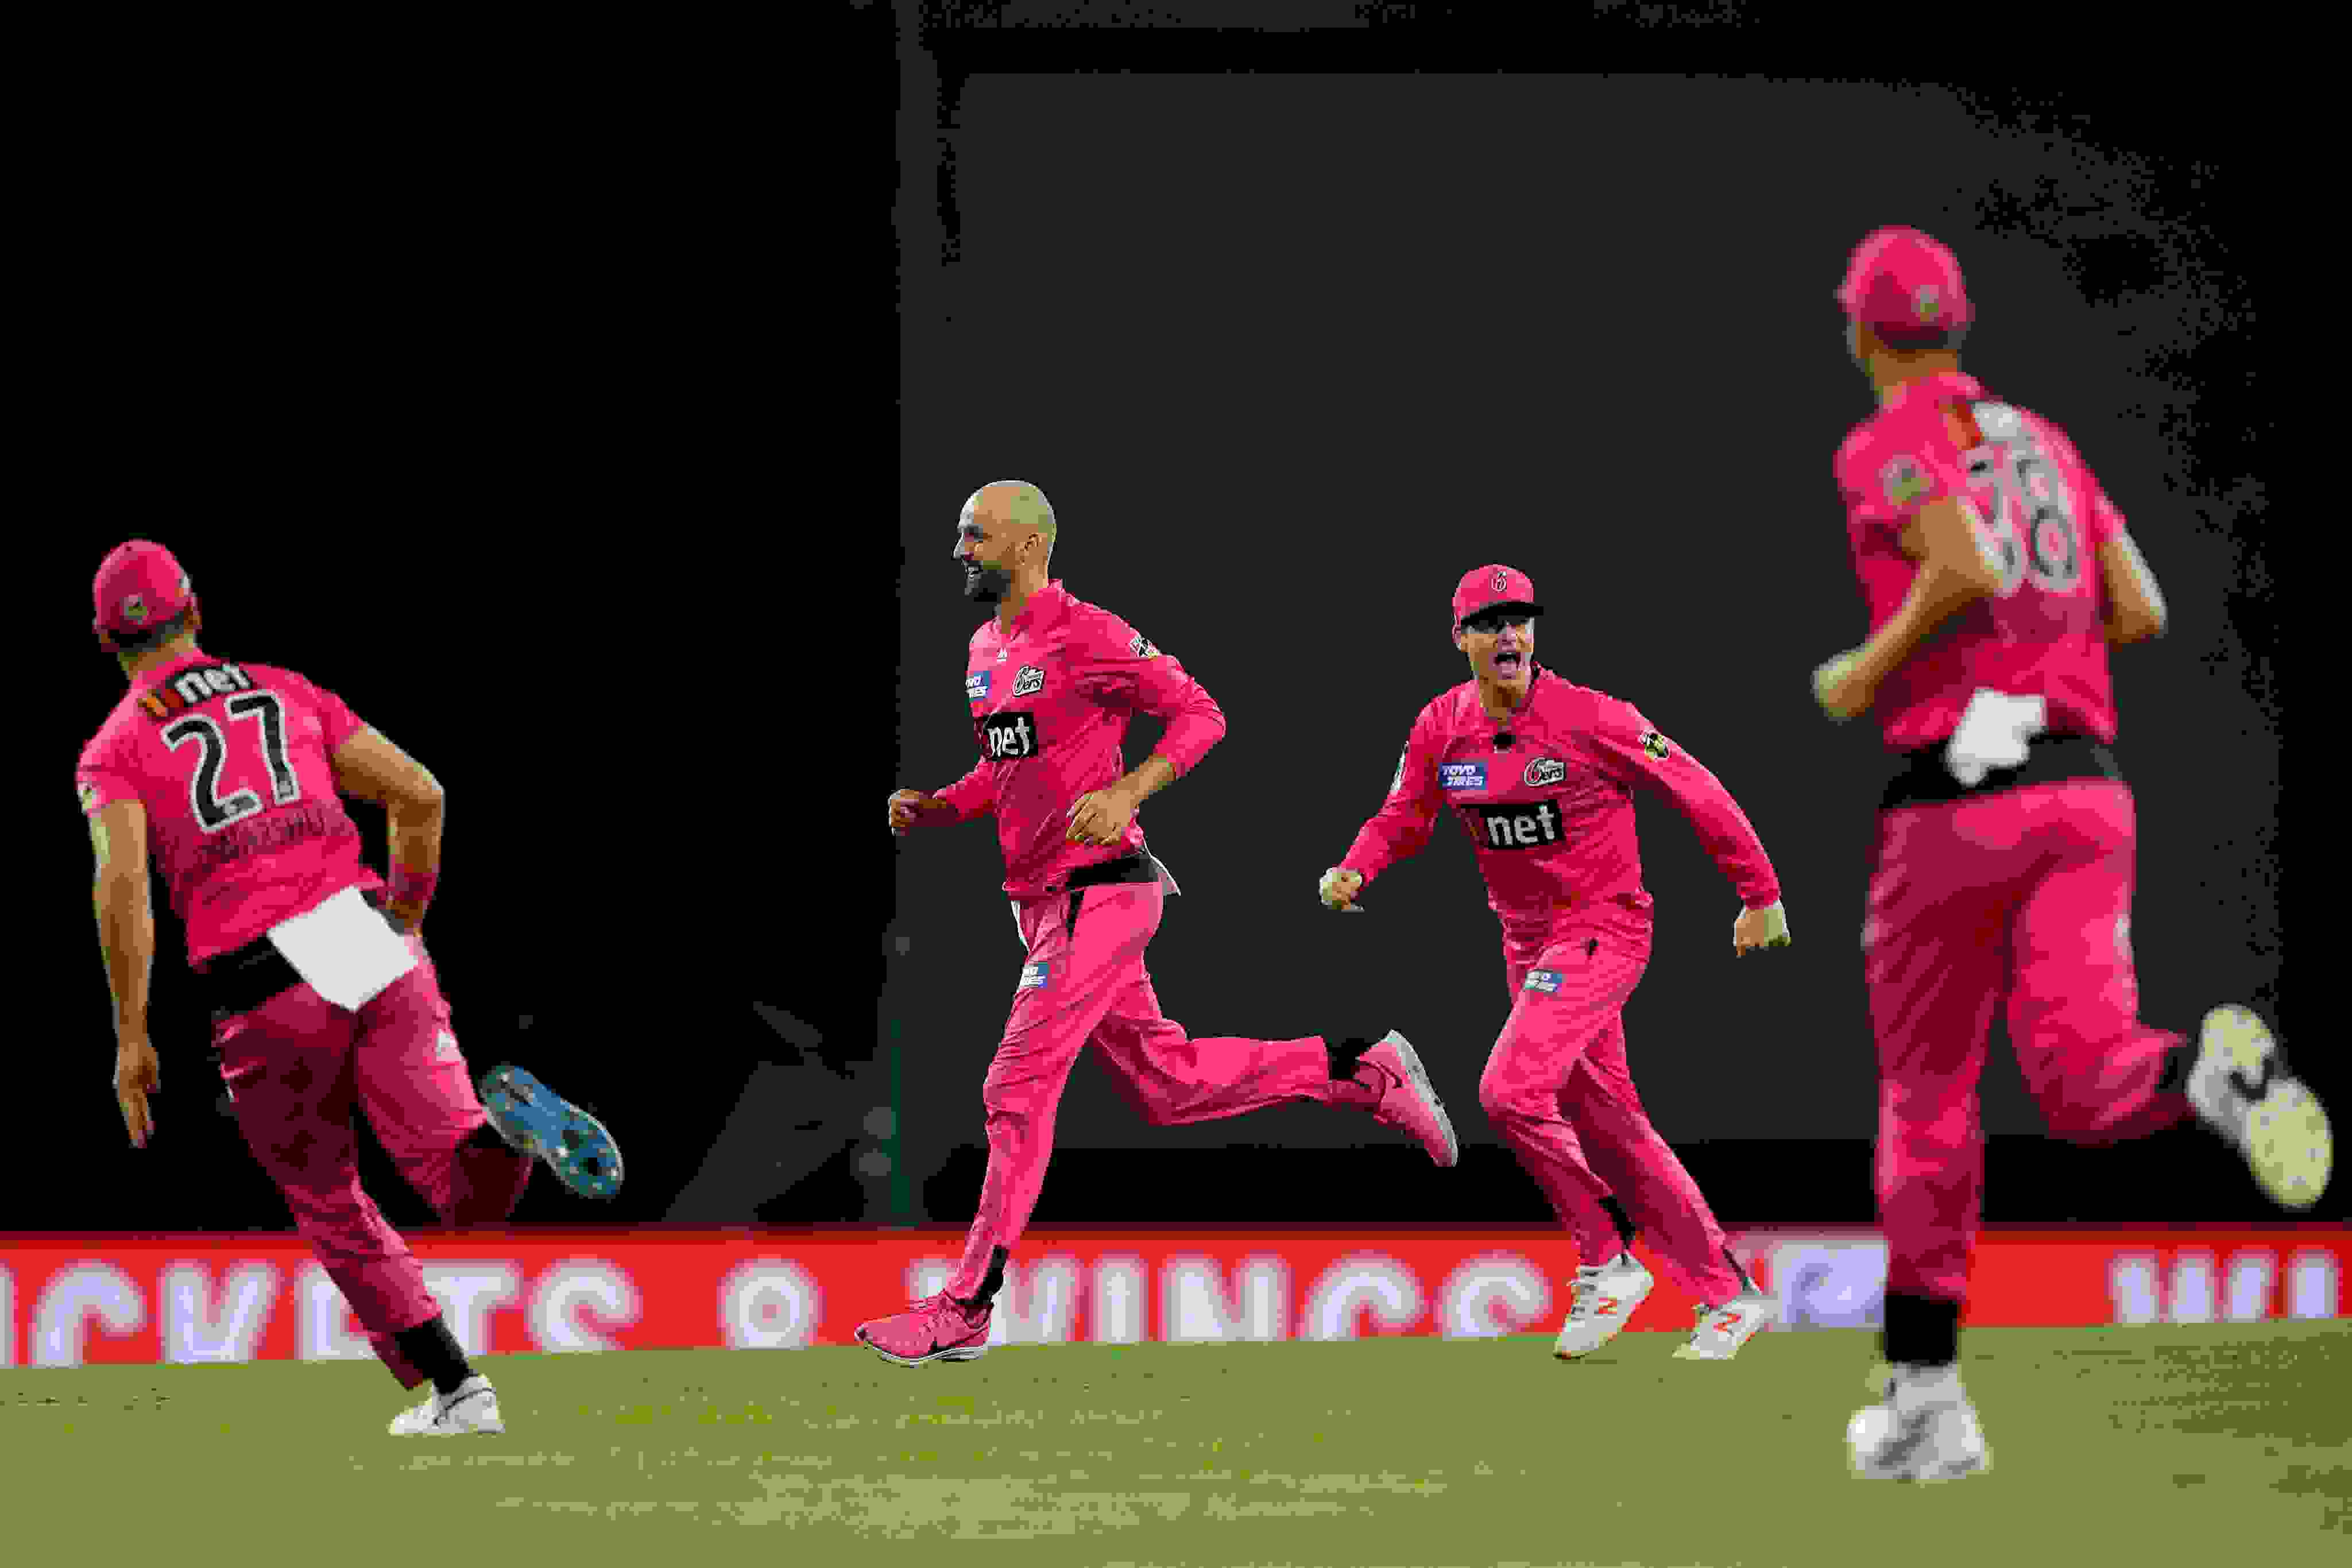 BBL: Sydney Sixers beat Melbourne Stars, win 2nd title